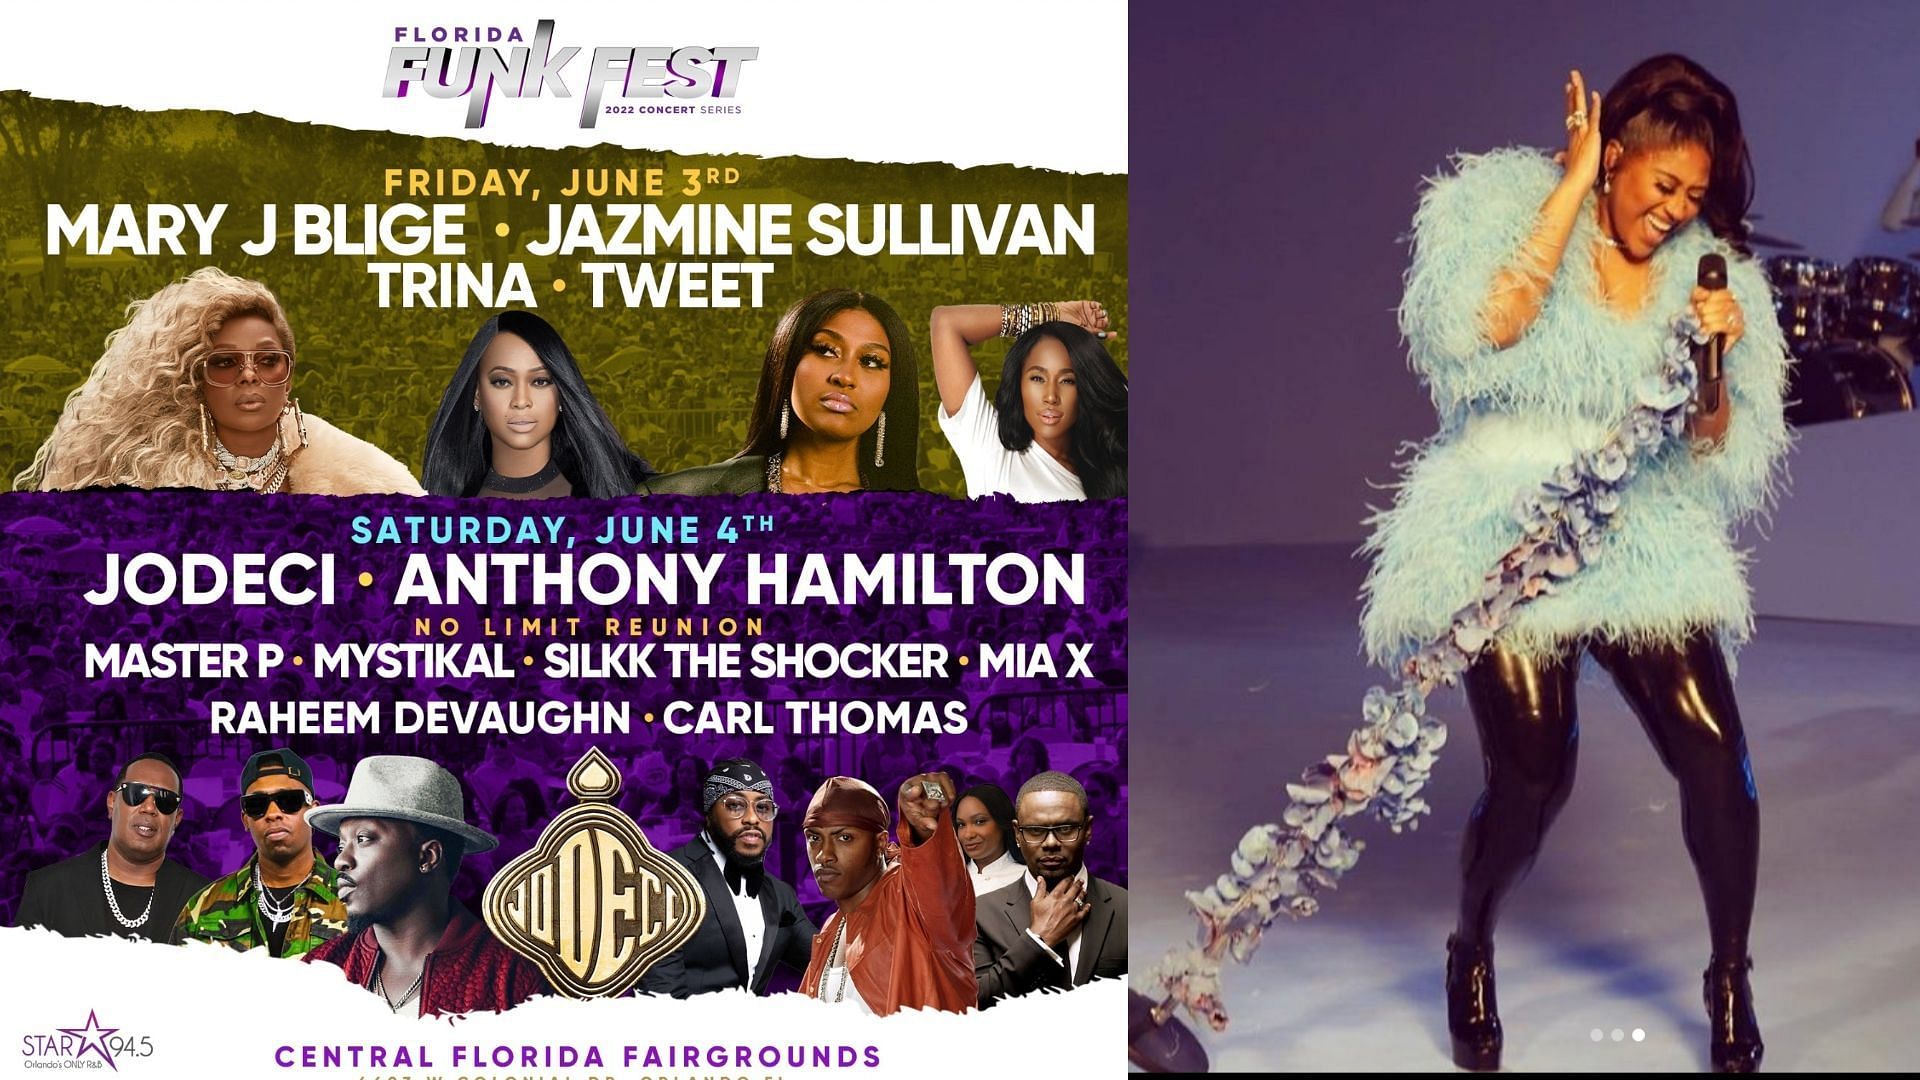 Jazmine Sullivan is among the performers at the Funk Fest slated for June this year. (Images via Instagram / @funkfestconcert and @jazminesullivan)